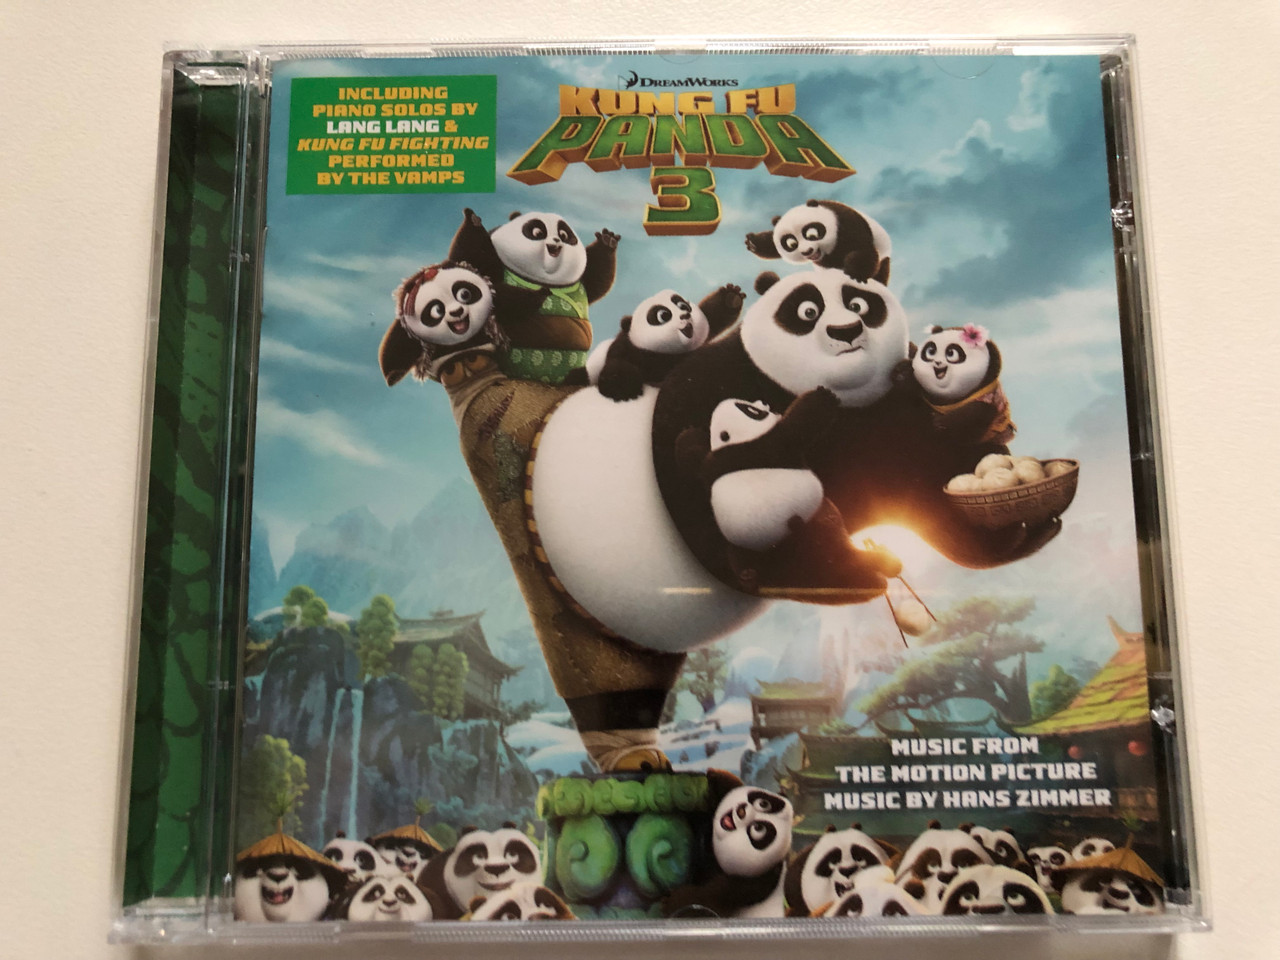 https://cdn10.bigcommerce.com/s-62bdpkt7pb/products/0/images/306399/Kung_Fu_Panda_3_Music_From_The_Motion_Picture_Music_By_Hans_Zimmer_Including_Piano_Solos_By_Lang_Lang_Kung_Fu_Fighting_Performed_By_The_Vamps_Sony_Classical_Audio_CD_2016_88875182862_1__46093.1698243704.1280.1280.JPG?c=2